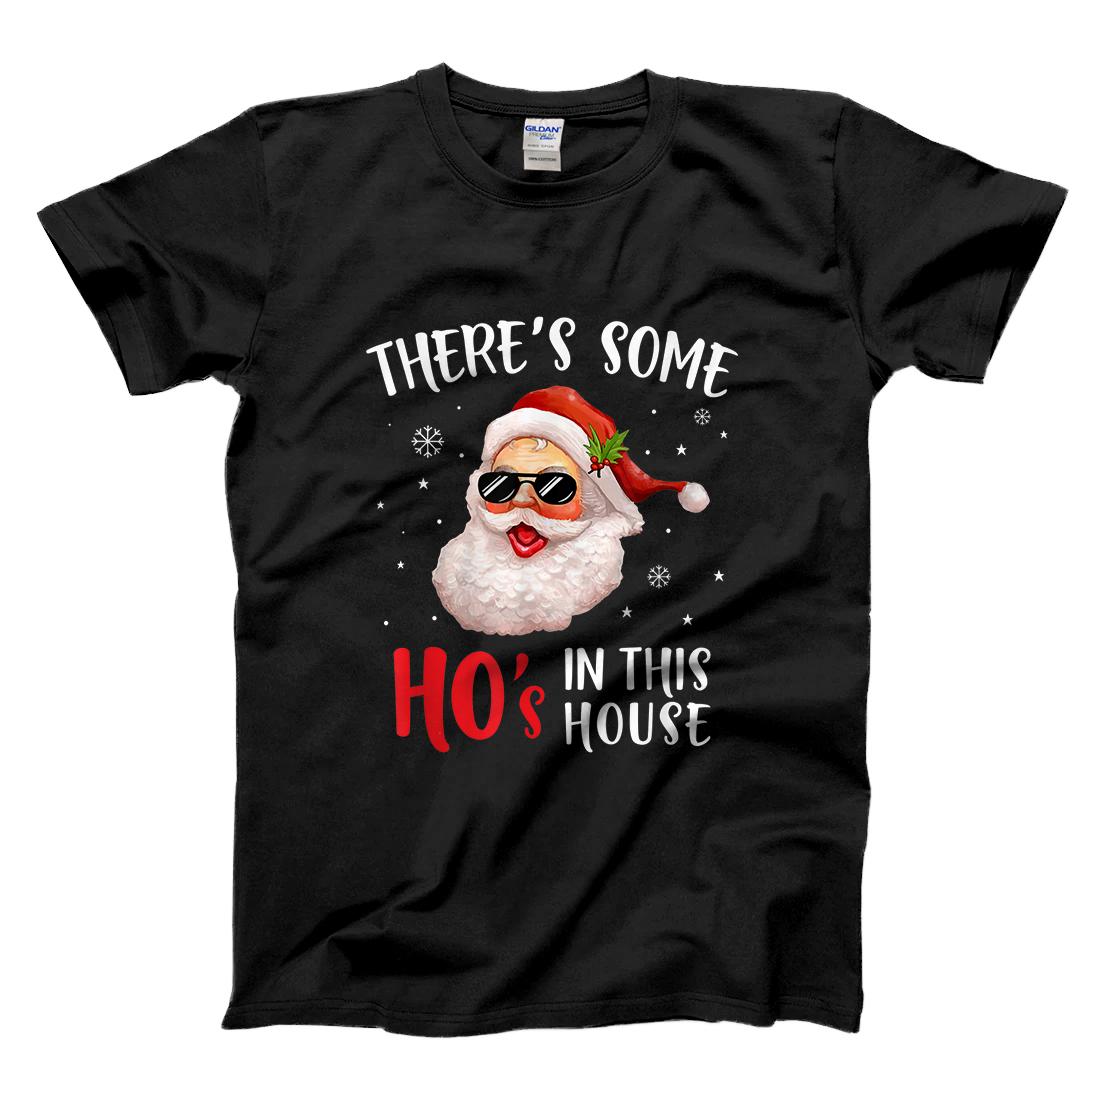 Personalized There's Some Hos in This House Funny Santa Claus Christmas T-Shirt